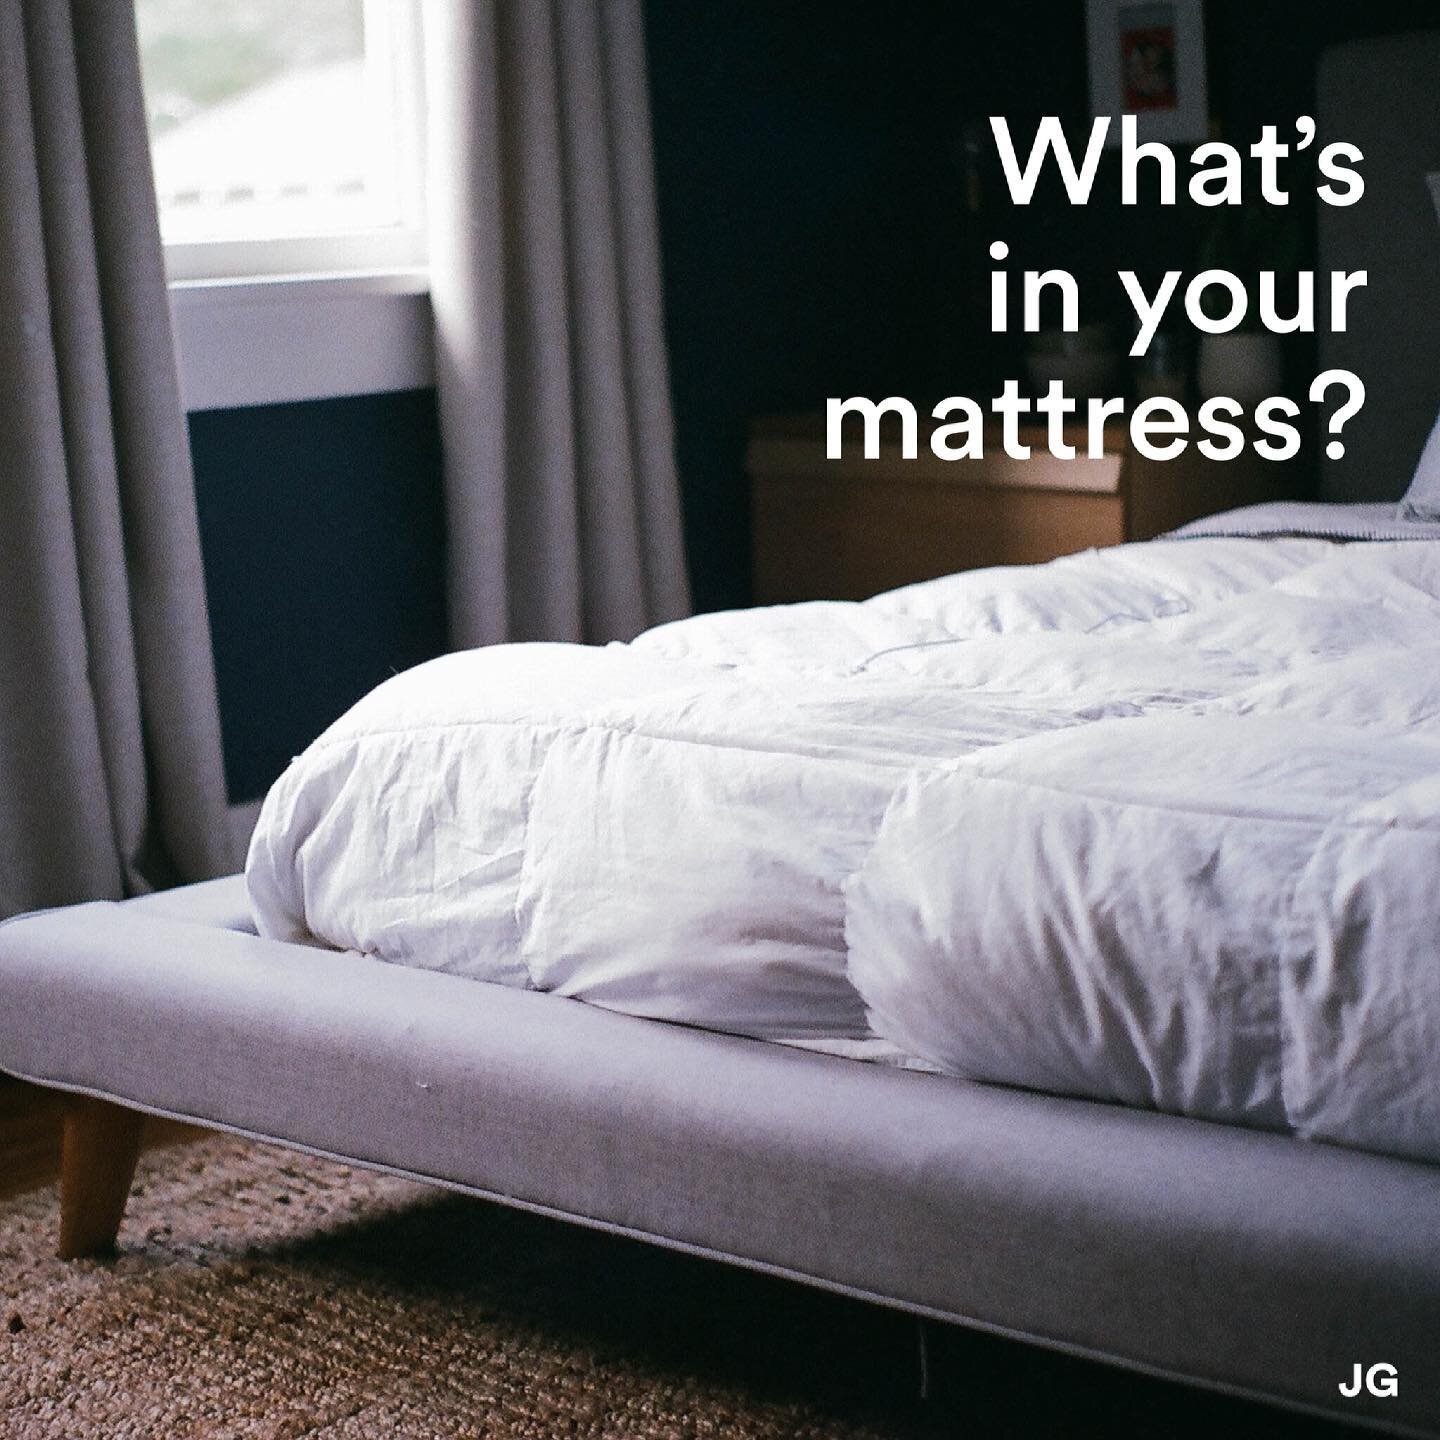 Mattresses &ndash; what&rsquo;s in them? I have had a few patients who became ill shortly after buying a new mattress. Most mattresses contain flame retardants and other synthetic chemicals. These chemicals &ldquo;out-gas&rdquo; from the mattress, an